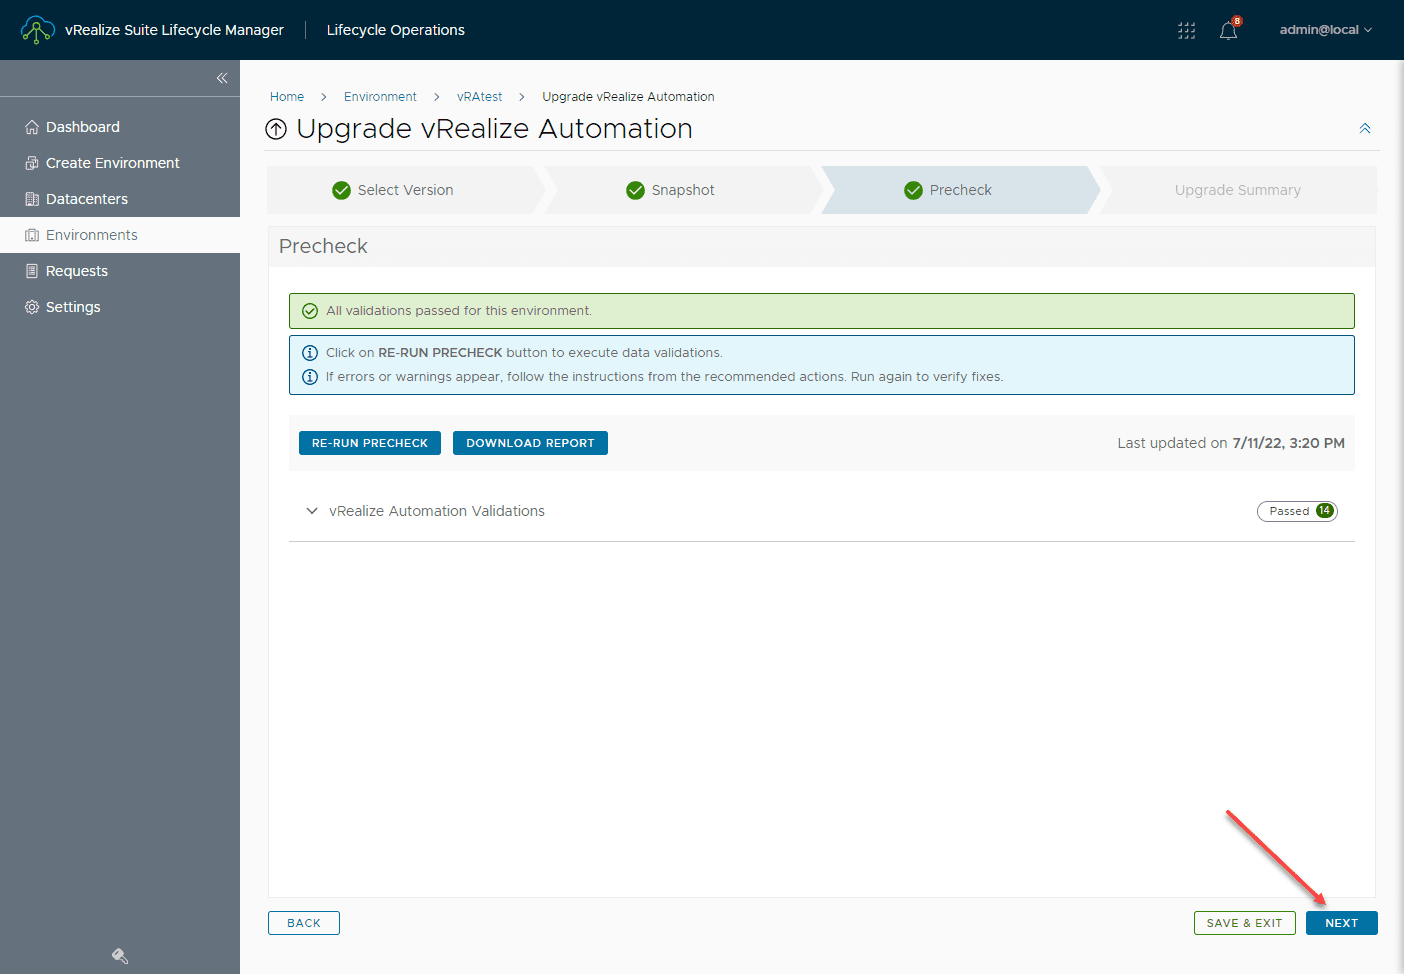 Precheck ran and passed to upgrade vRealize Automation